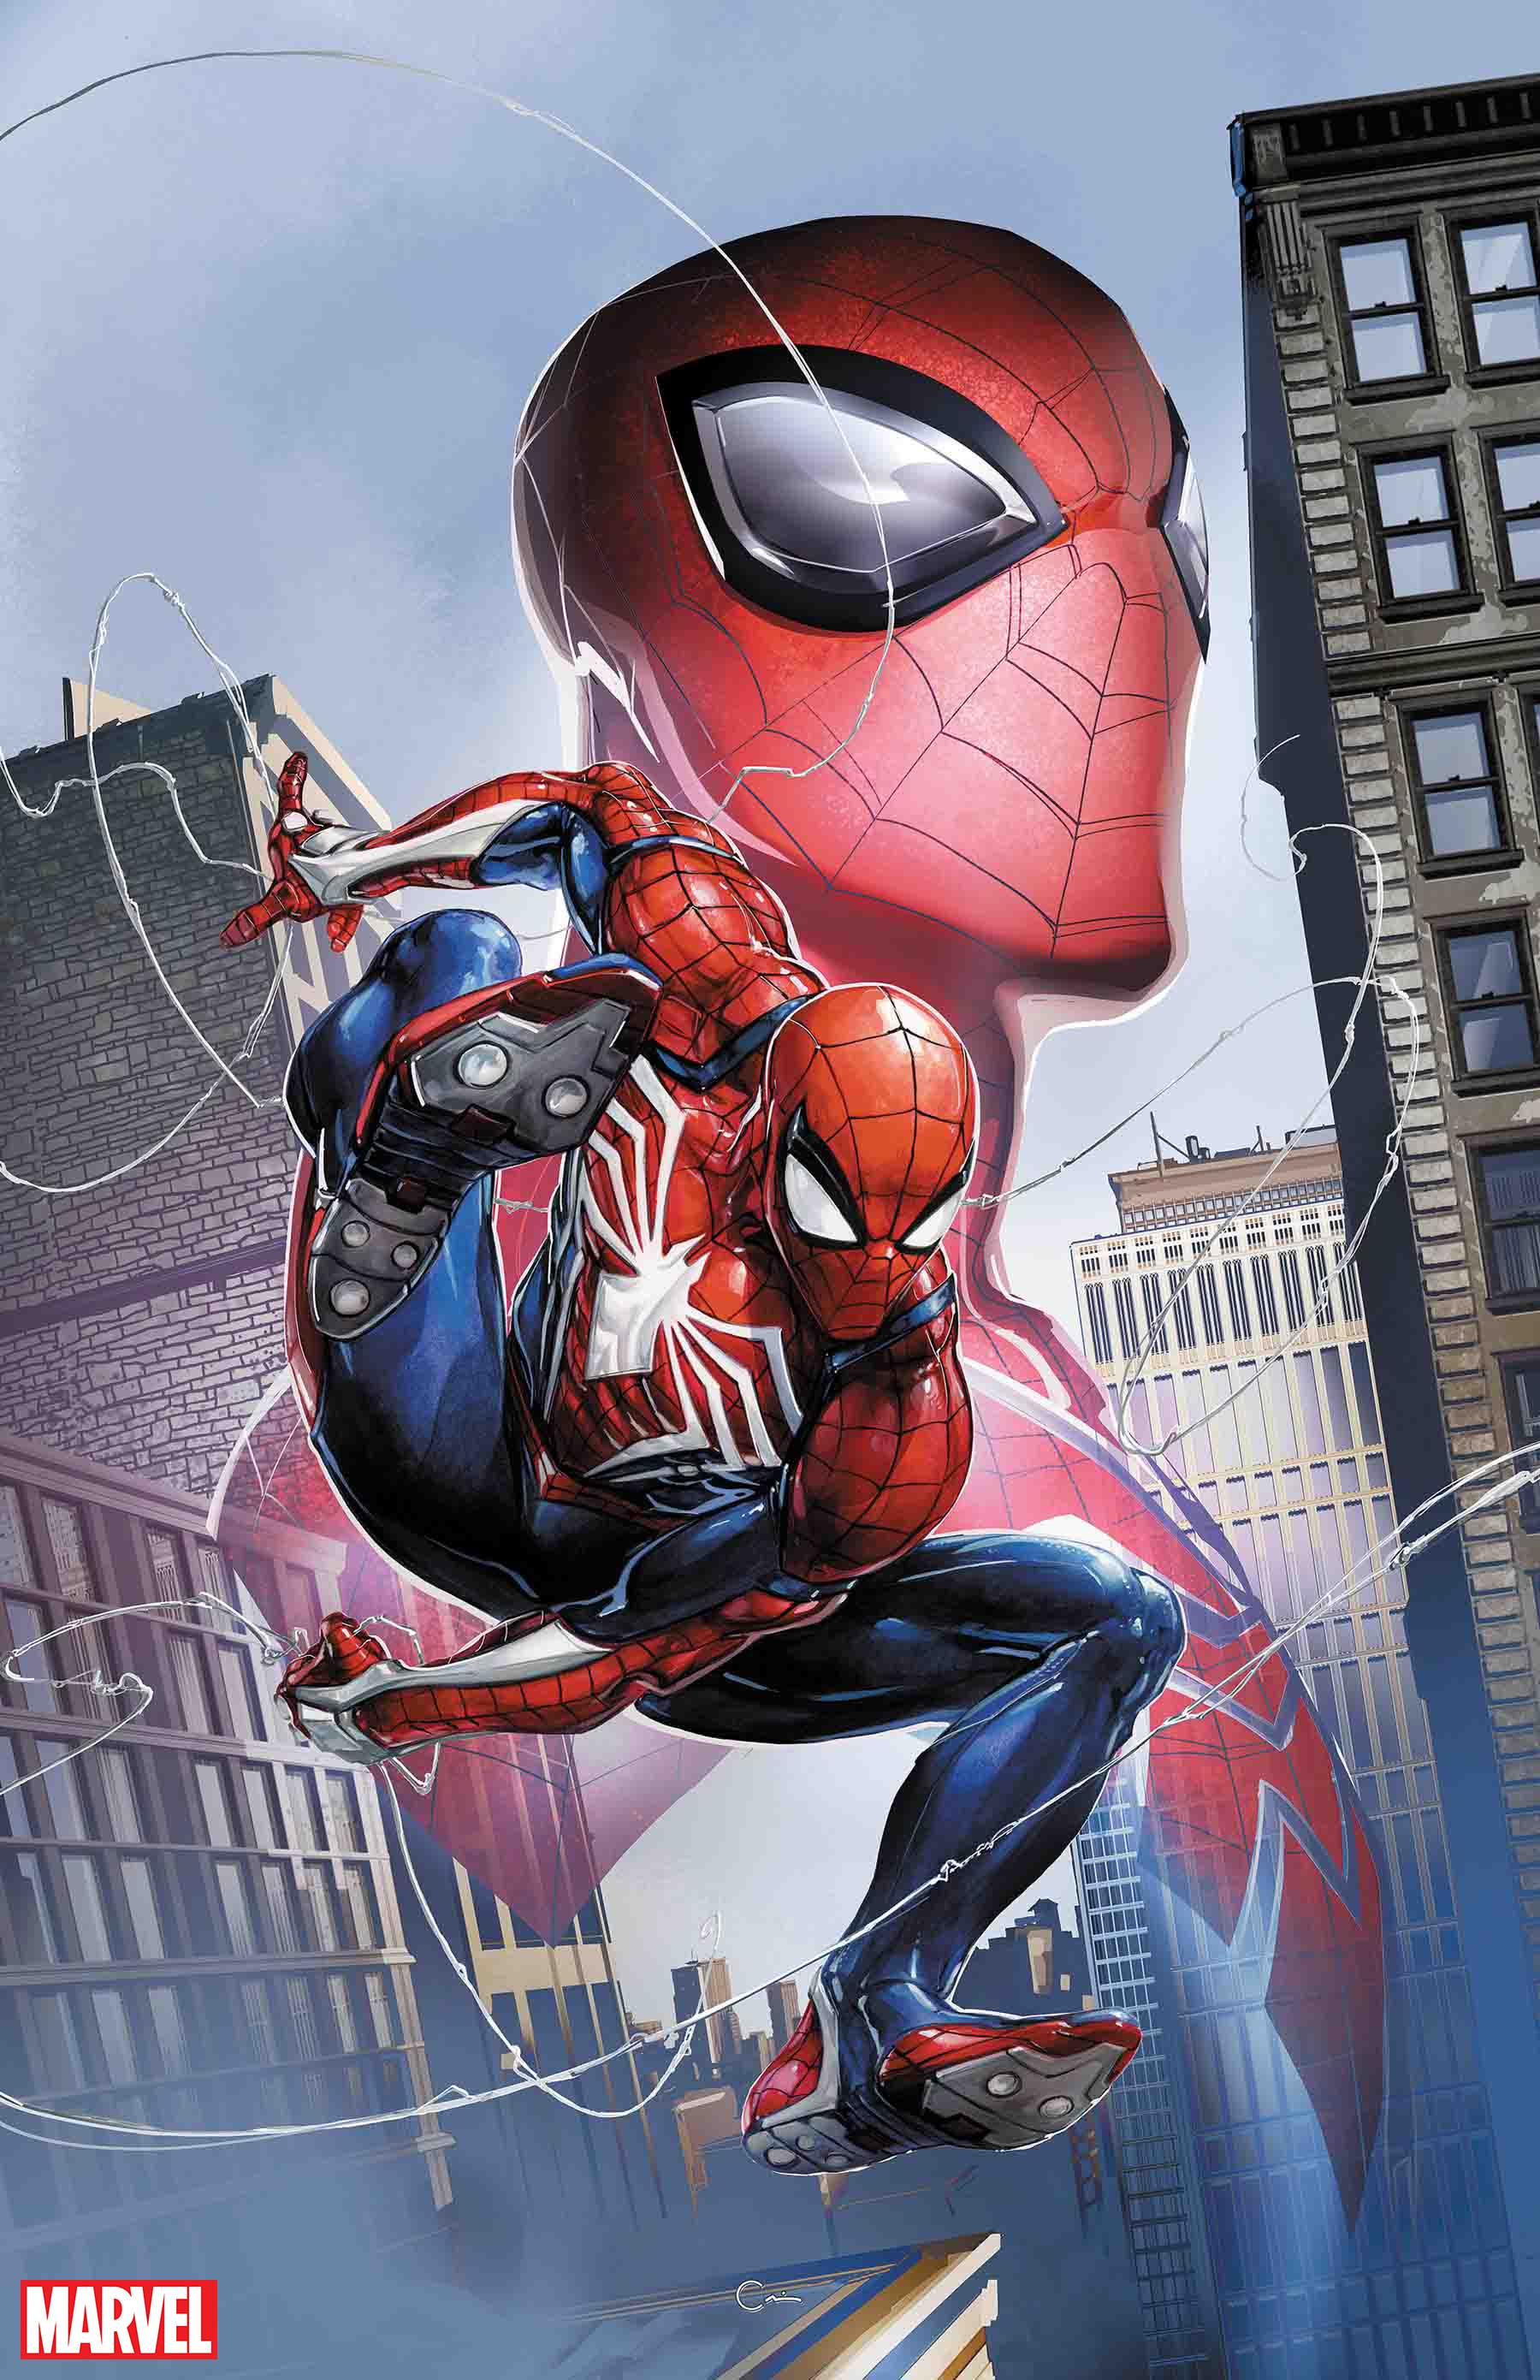 PS4 Spider-Man Meets Superior Spider-Man! (Spoilers!) | Geeks